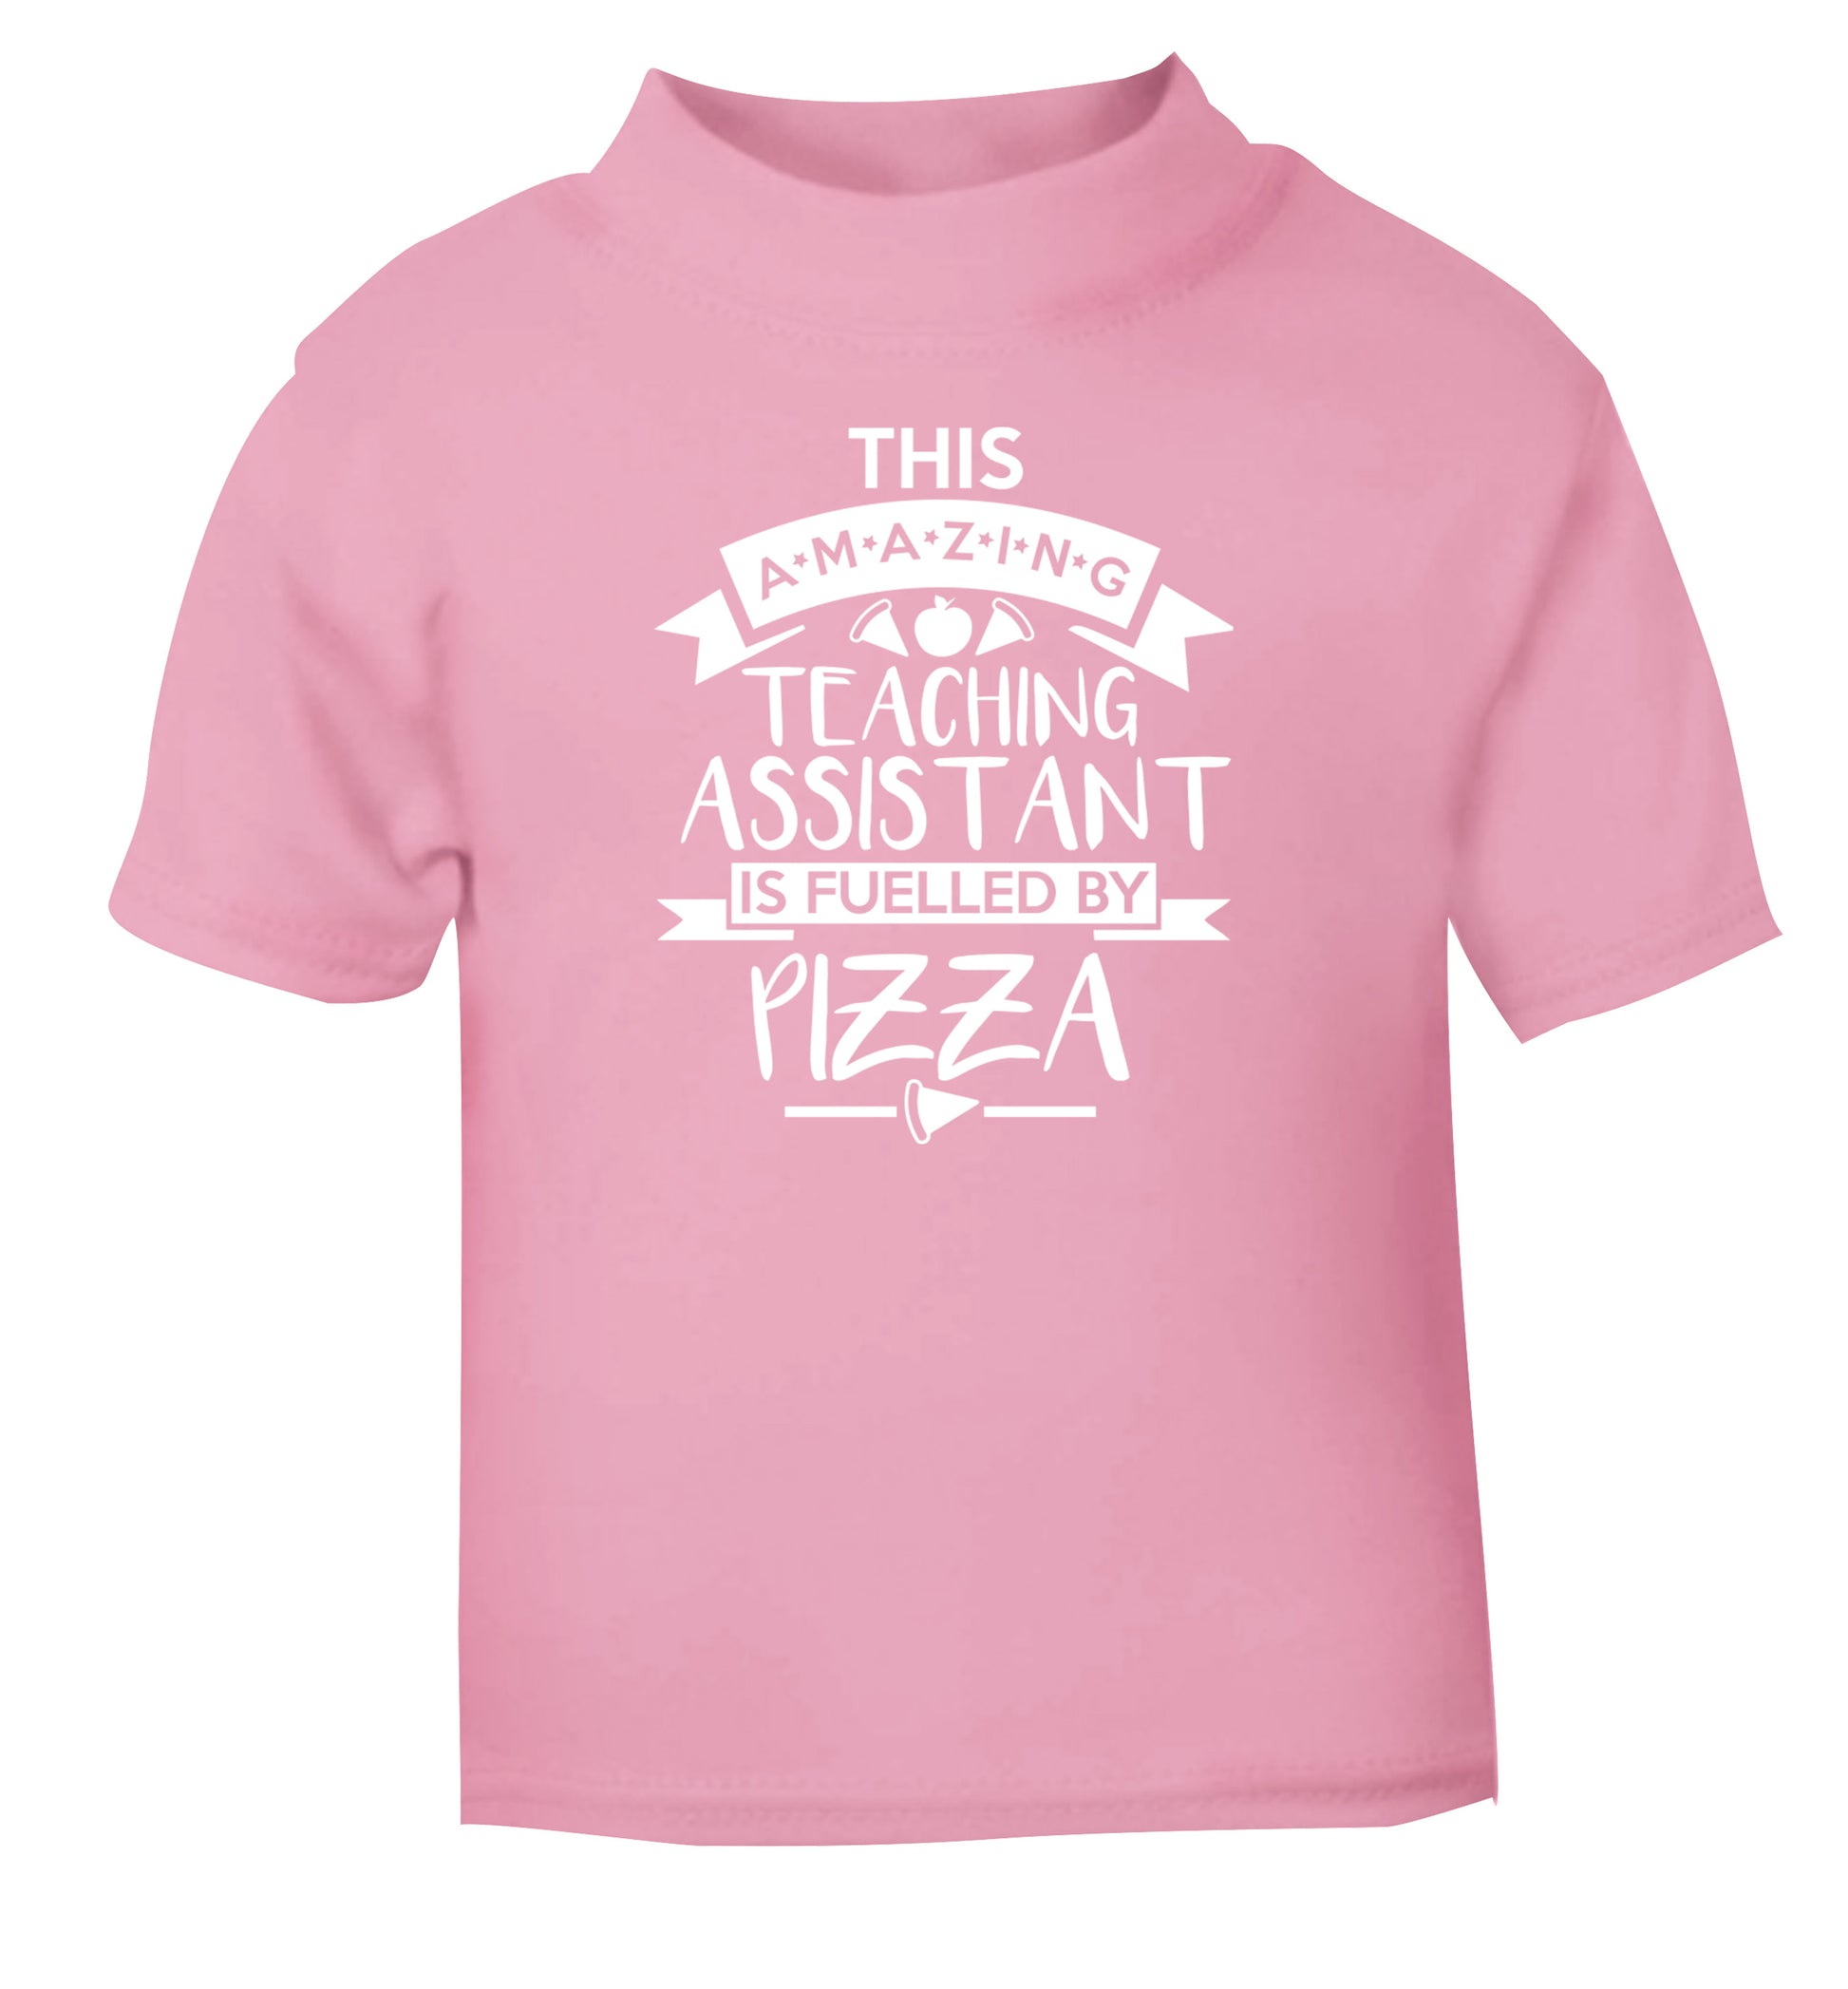 This amazing teaching assistant is fuelled by pizza light pink Baby Toddler Tshirt 2 Years